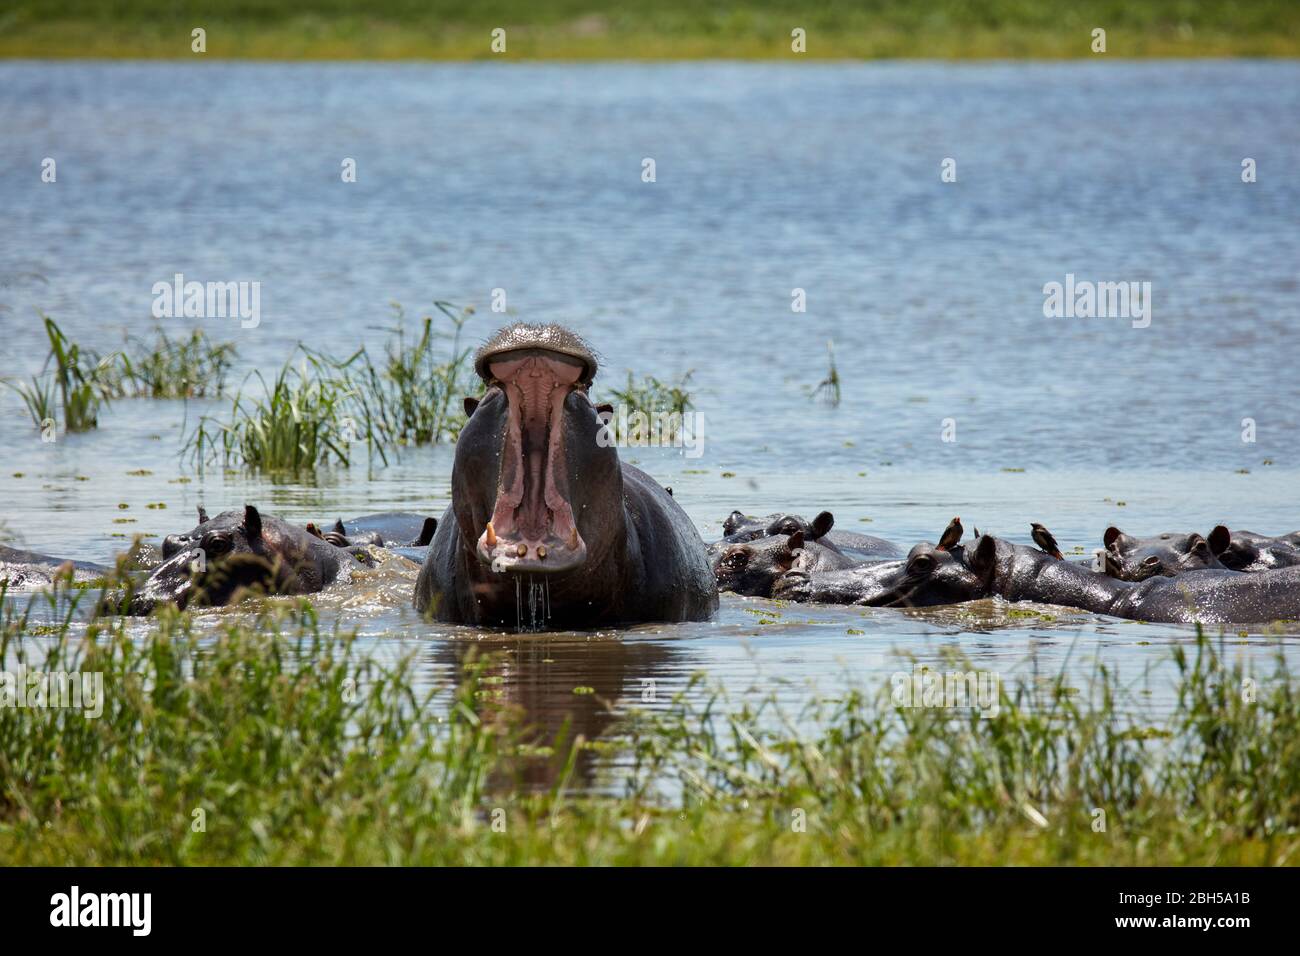 Hippo ybéning, Hippo Pools, Moremi Game Reserve, Botswana, Afrique Banque D'Images